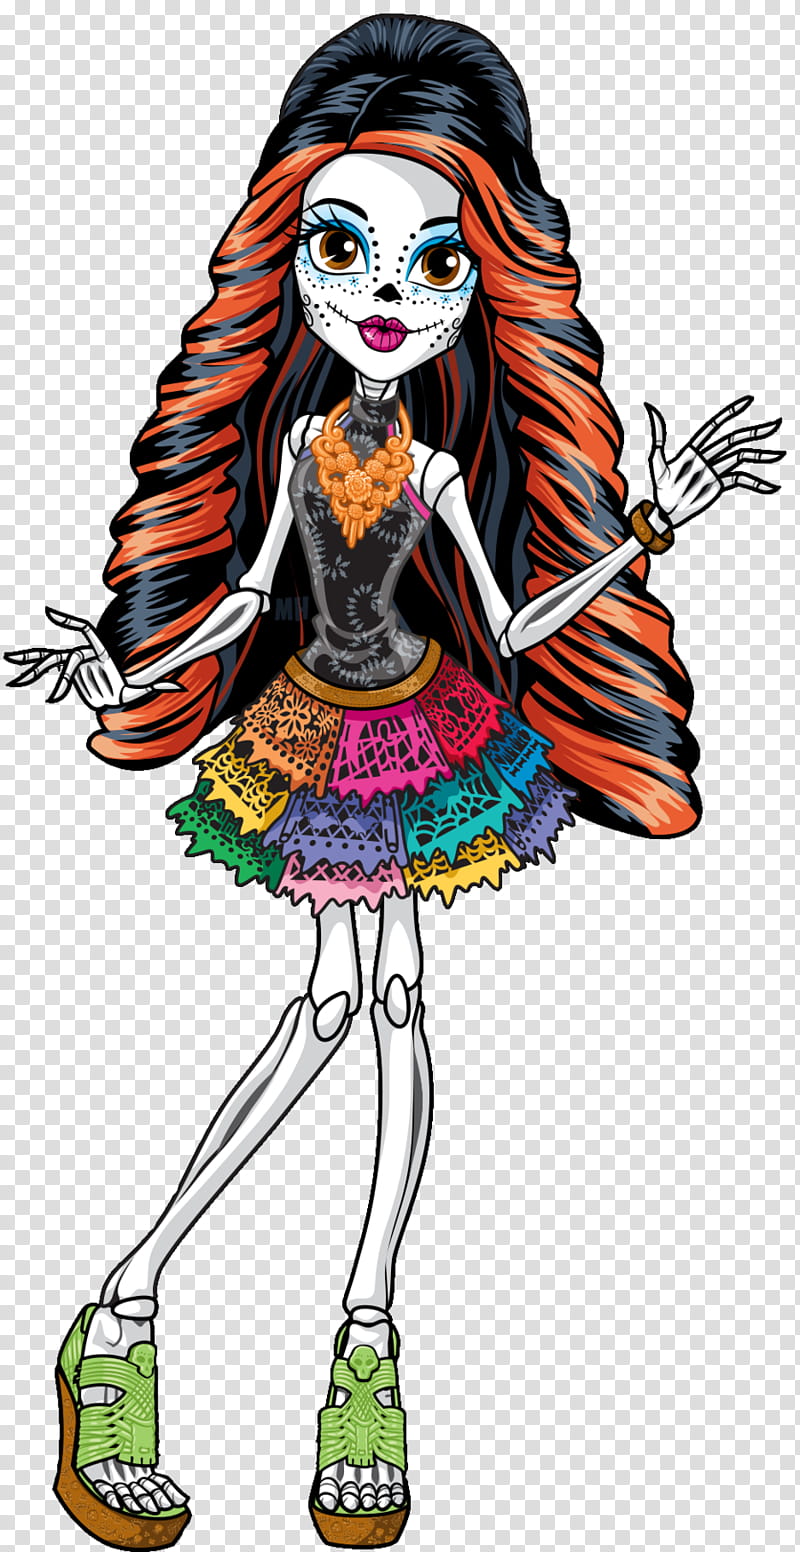 Monster High, girl with sugar skull paint face wearing black mini, red, and blue mini dress illustration transparent background PNG clipart